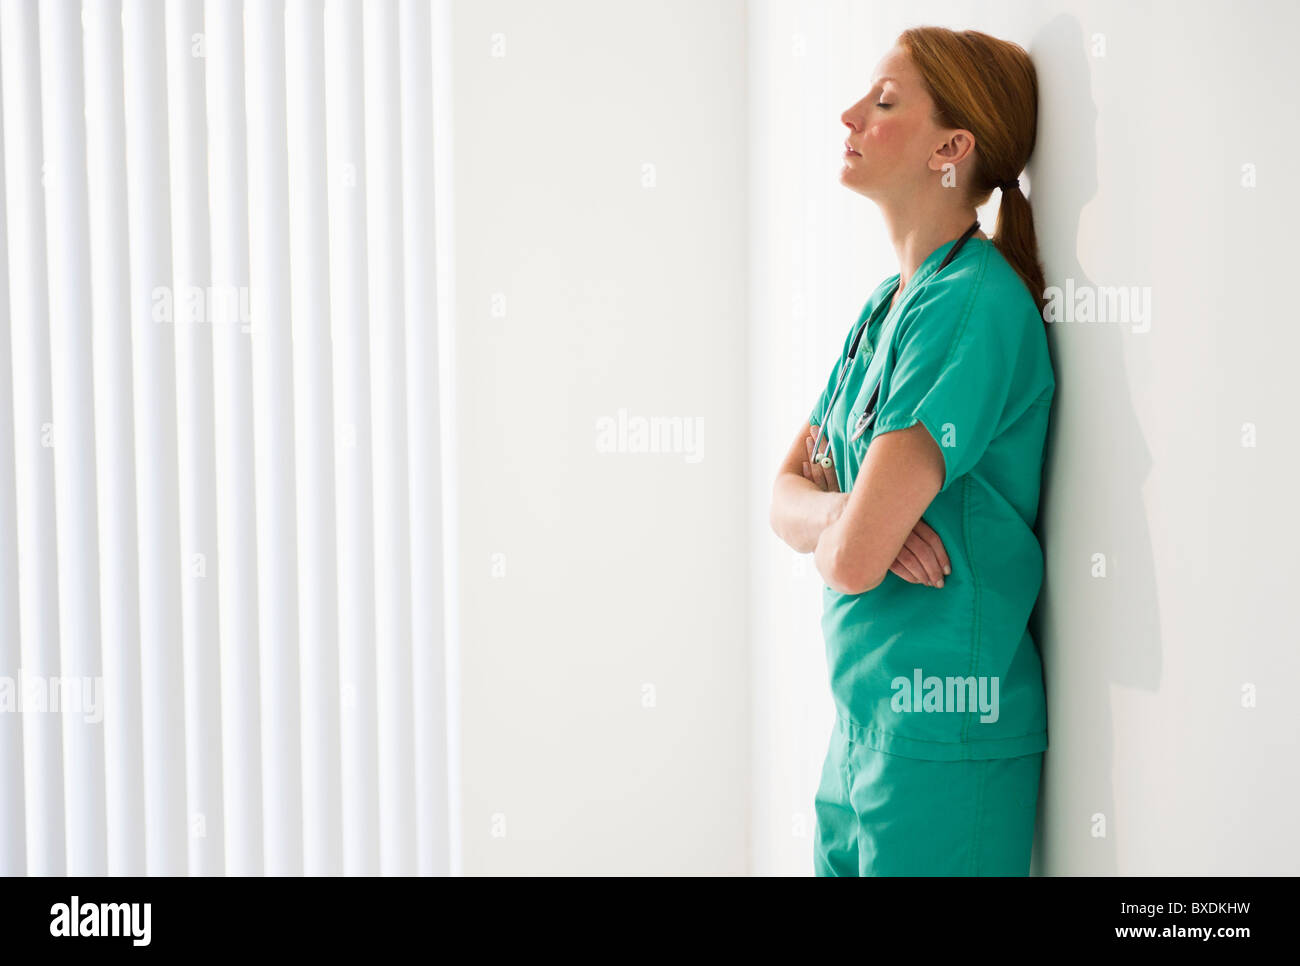 Tired doctor leaning against wall Stock Photo